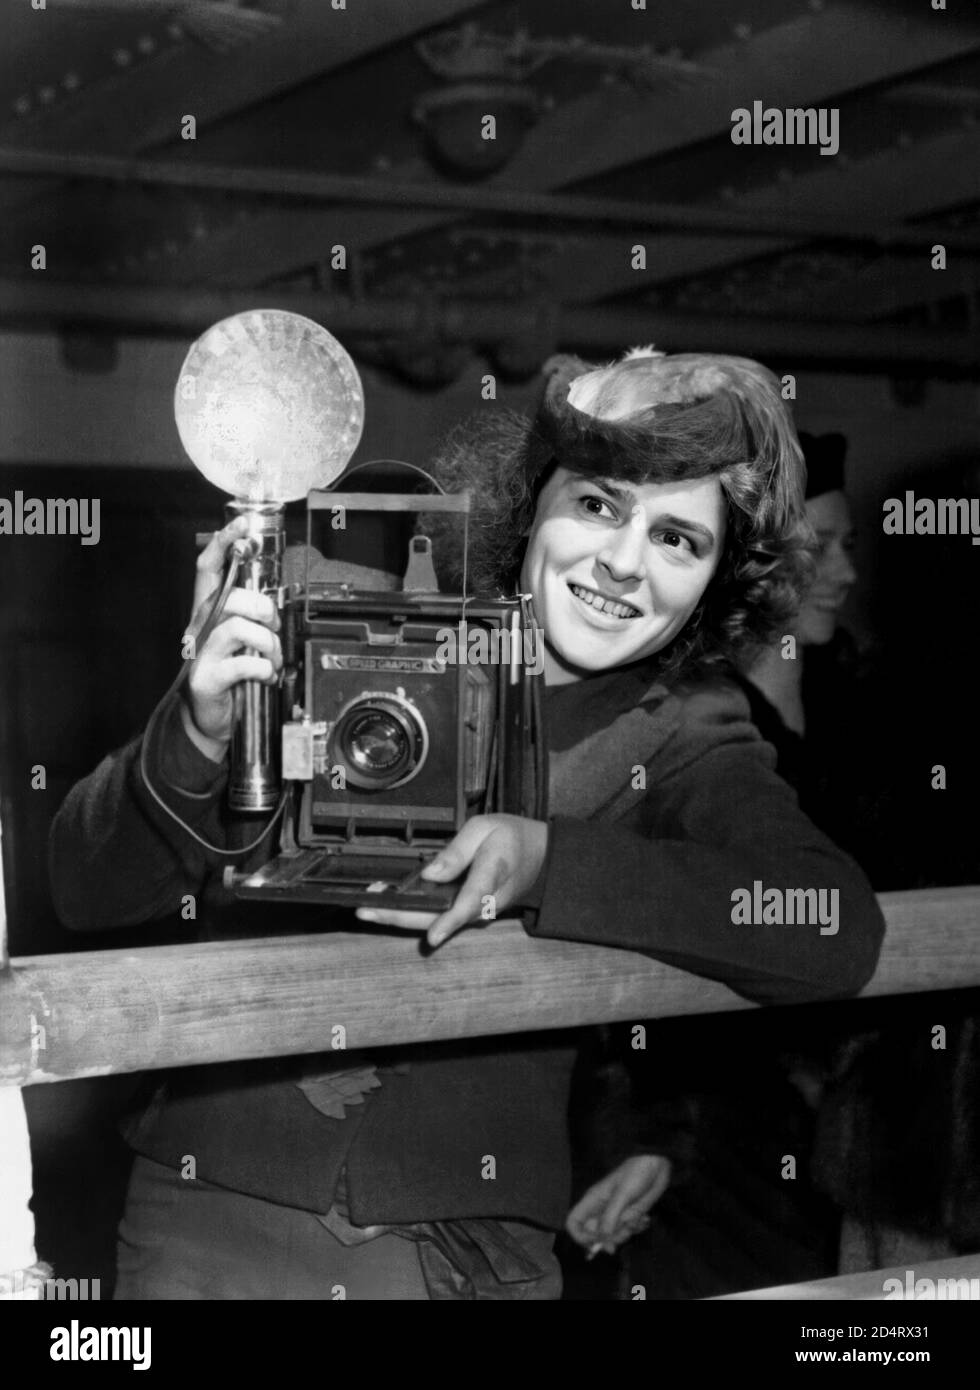 1939 , NEW YORK , USA : The celebrated American woman reporter photographer  MARGARET BOURKE-WHITE ( 1904 - 1971 ) at work in NY harbor on a boat on route to WAR in EUROPE . Portrait by unknown photographer . At time Margaret married the celebrated novelist Erskine Caldwell . Bourke-White was the first known female War correspondent and the first woman to be allowed to work in combat zones during the World War II. In 1941 she traveled to the Soviet Union and from 1942 was attached to the U.S. Army Air Force in North Africa , then to the U.S. Army in Italy and later in Germany .- BOURKE WHITE - Stock Photo